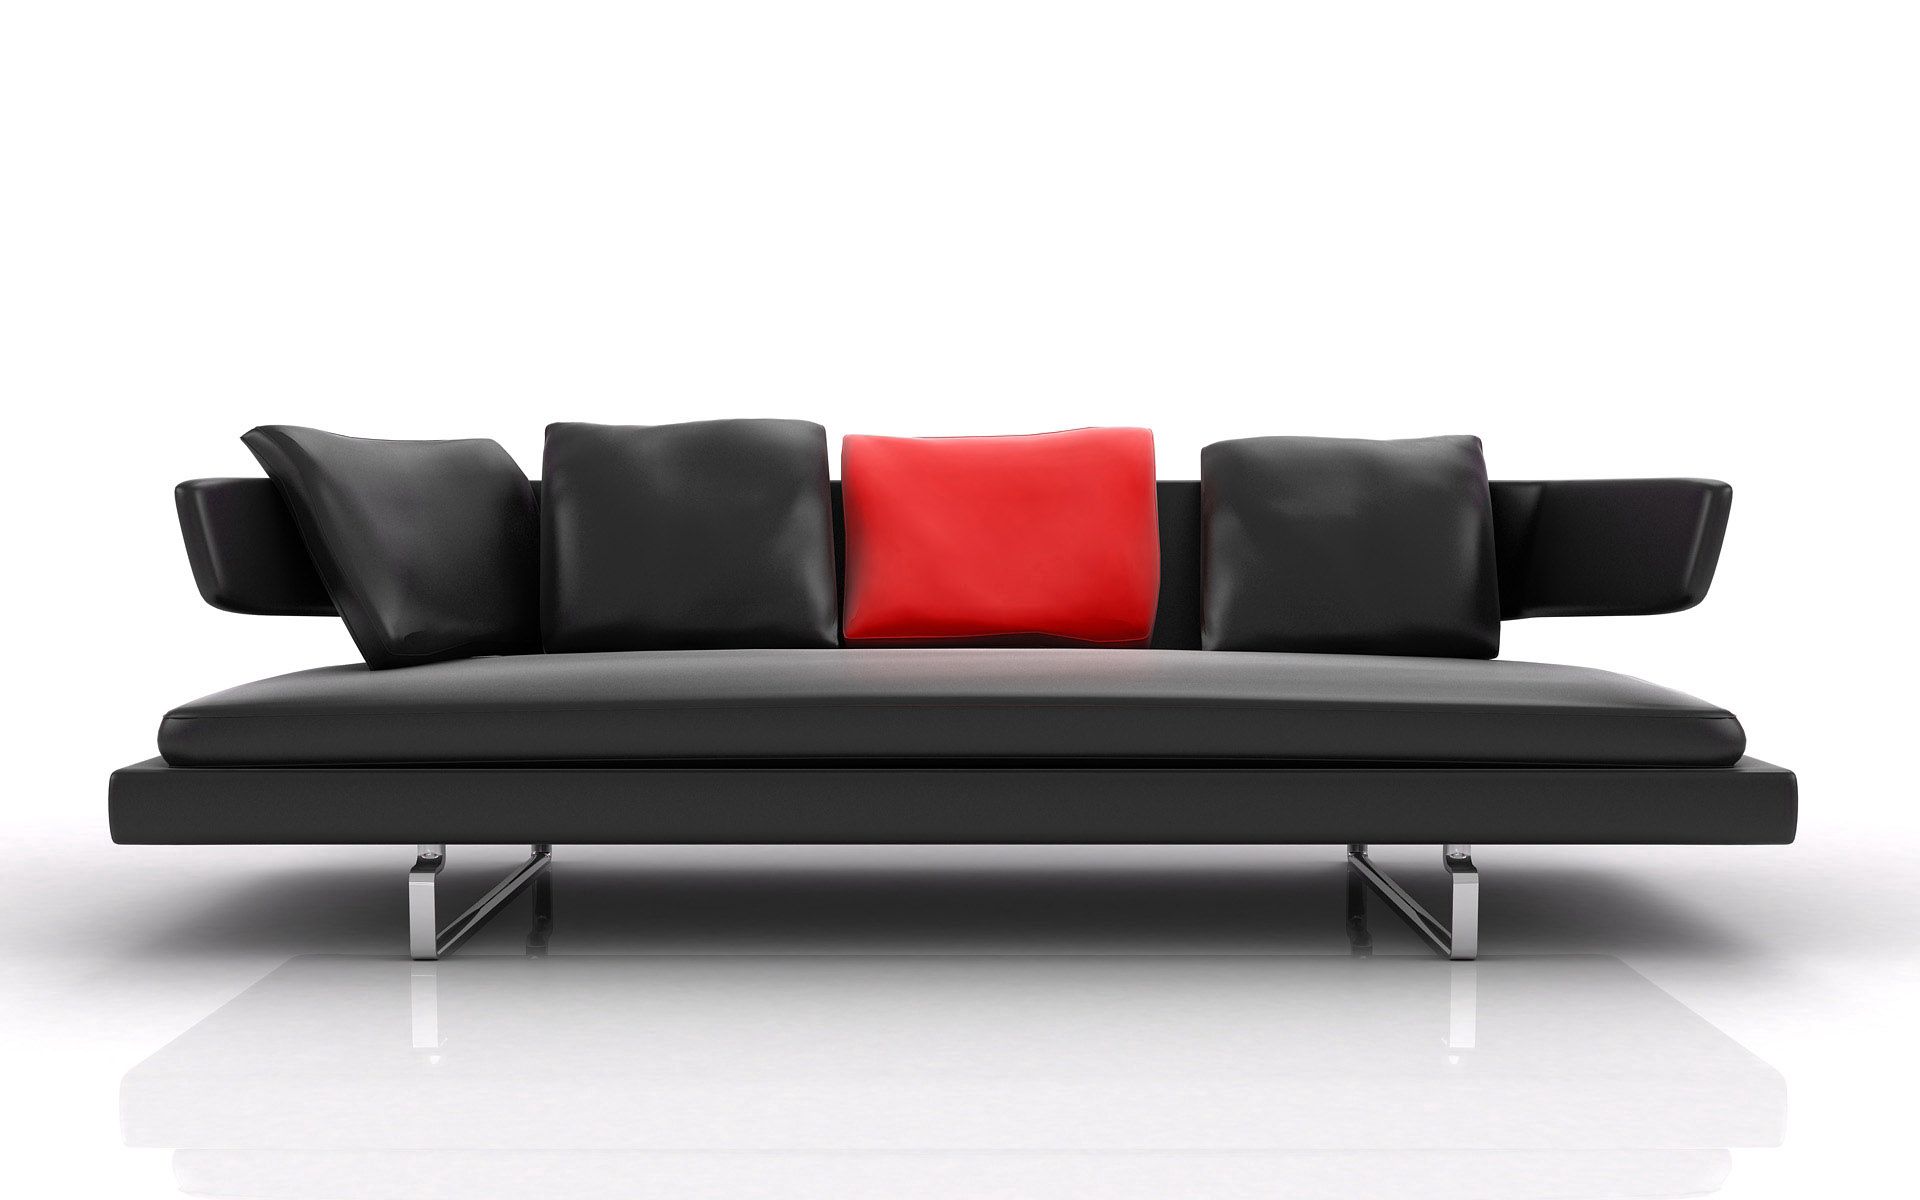 furniture, miscellanea, miscellaneous, style, sofa, modern, up to date, cushions, pillows 1080p